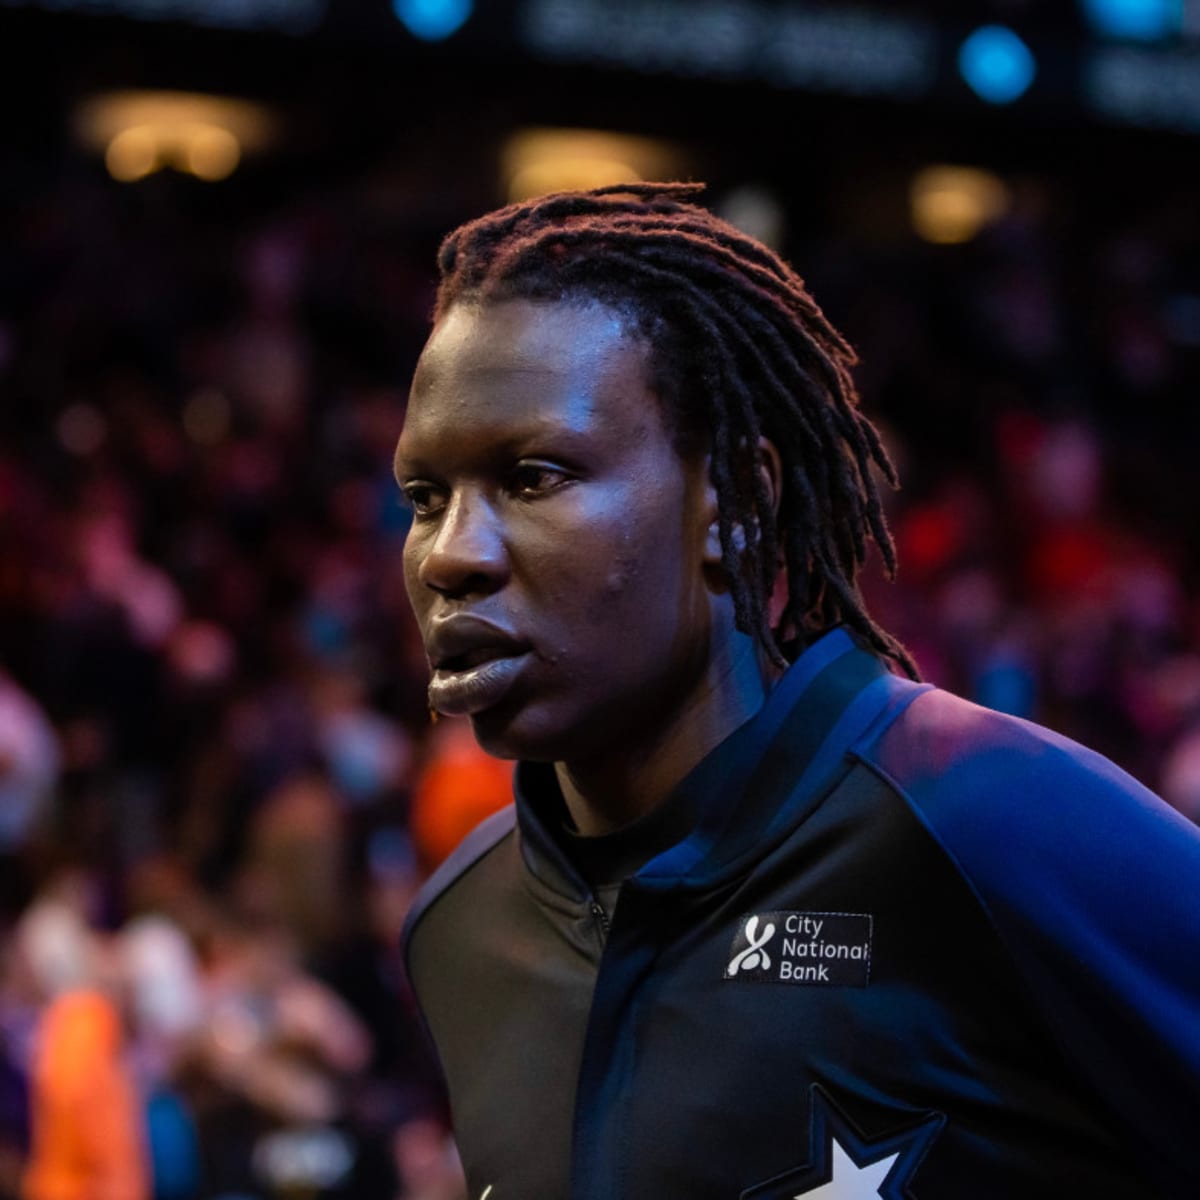 Bol Bol is signing with the Phoenix Suns 👀 Does Phoenix now have